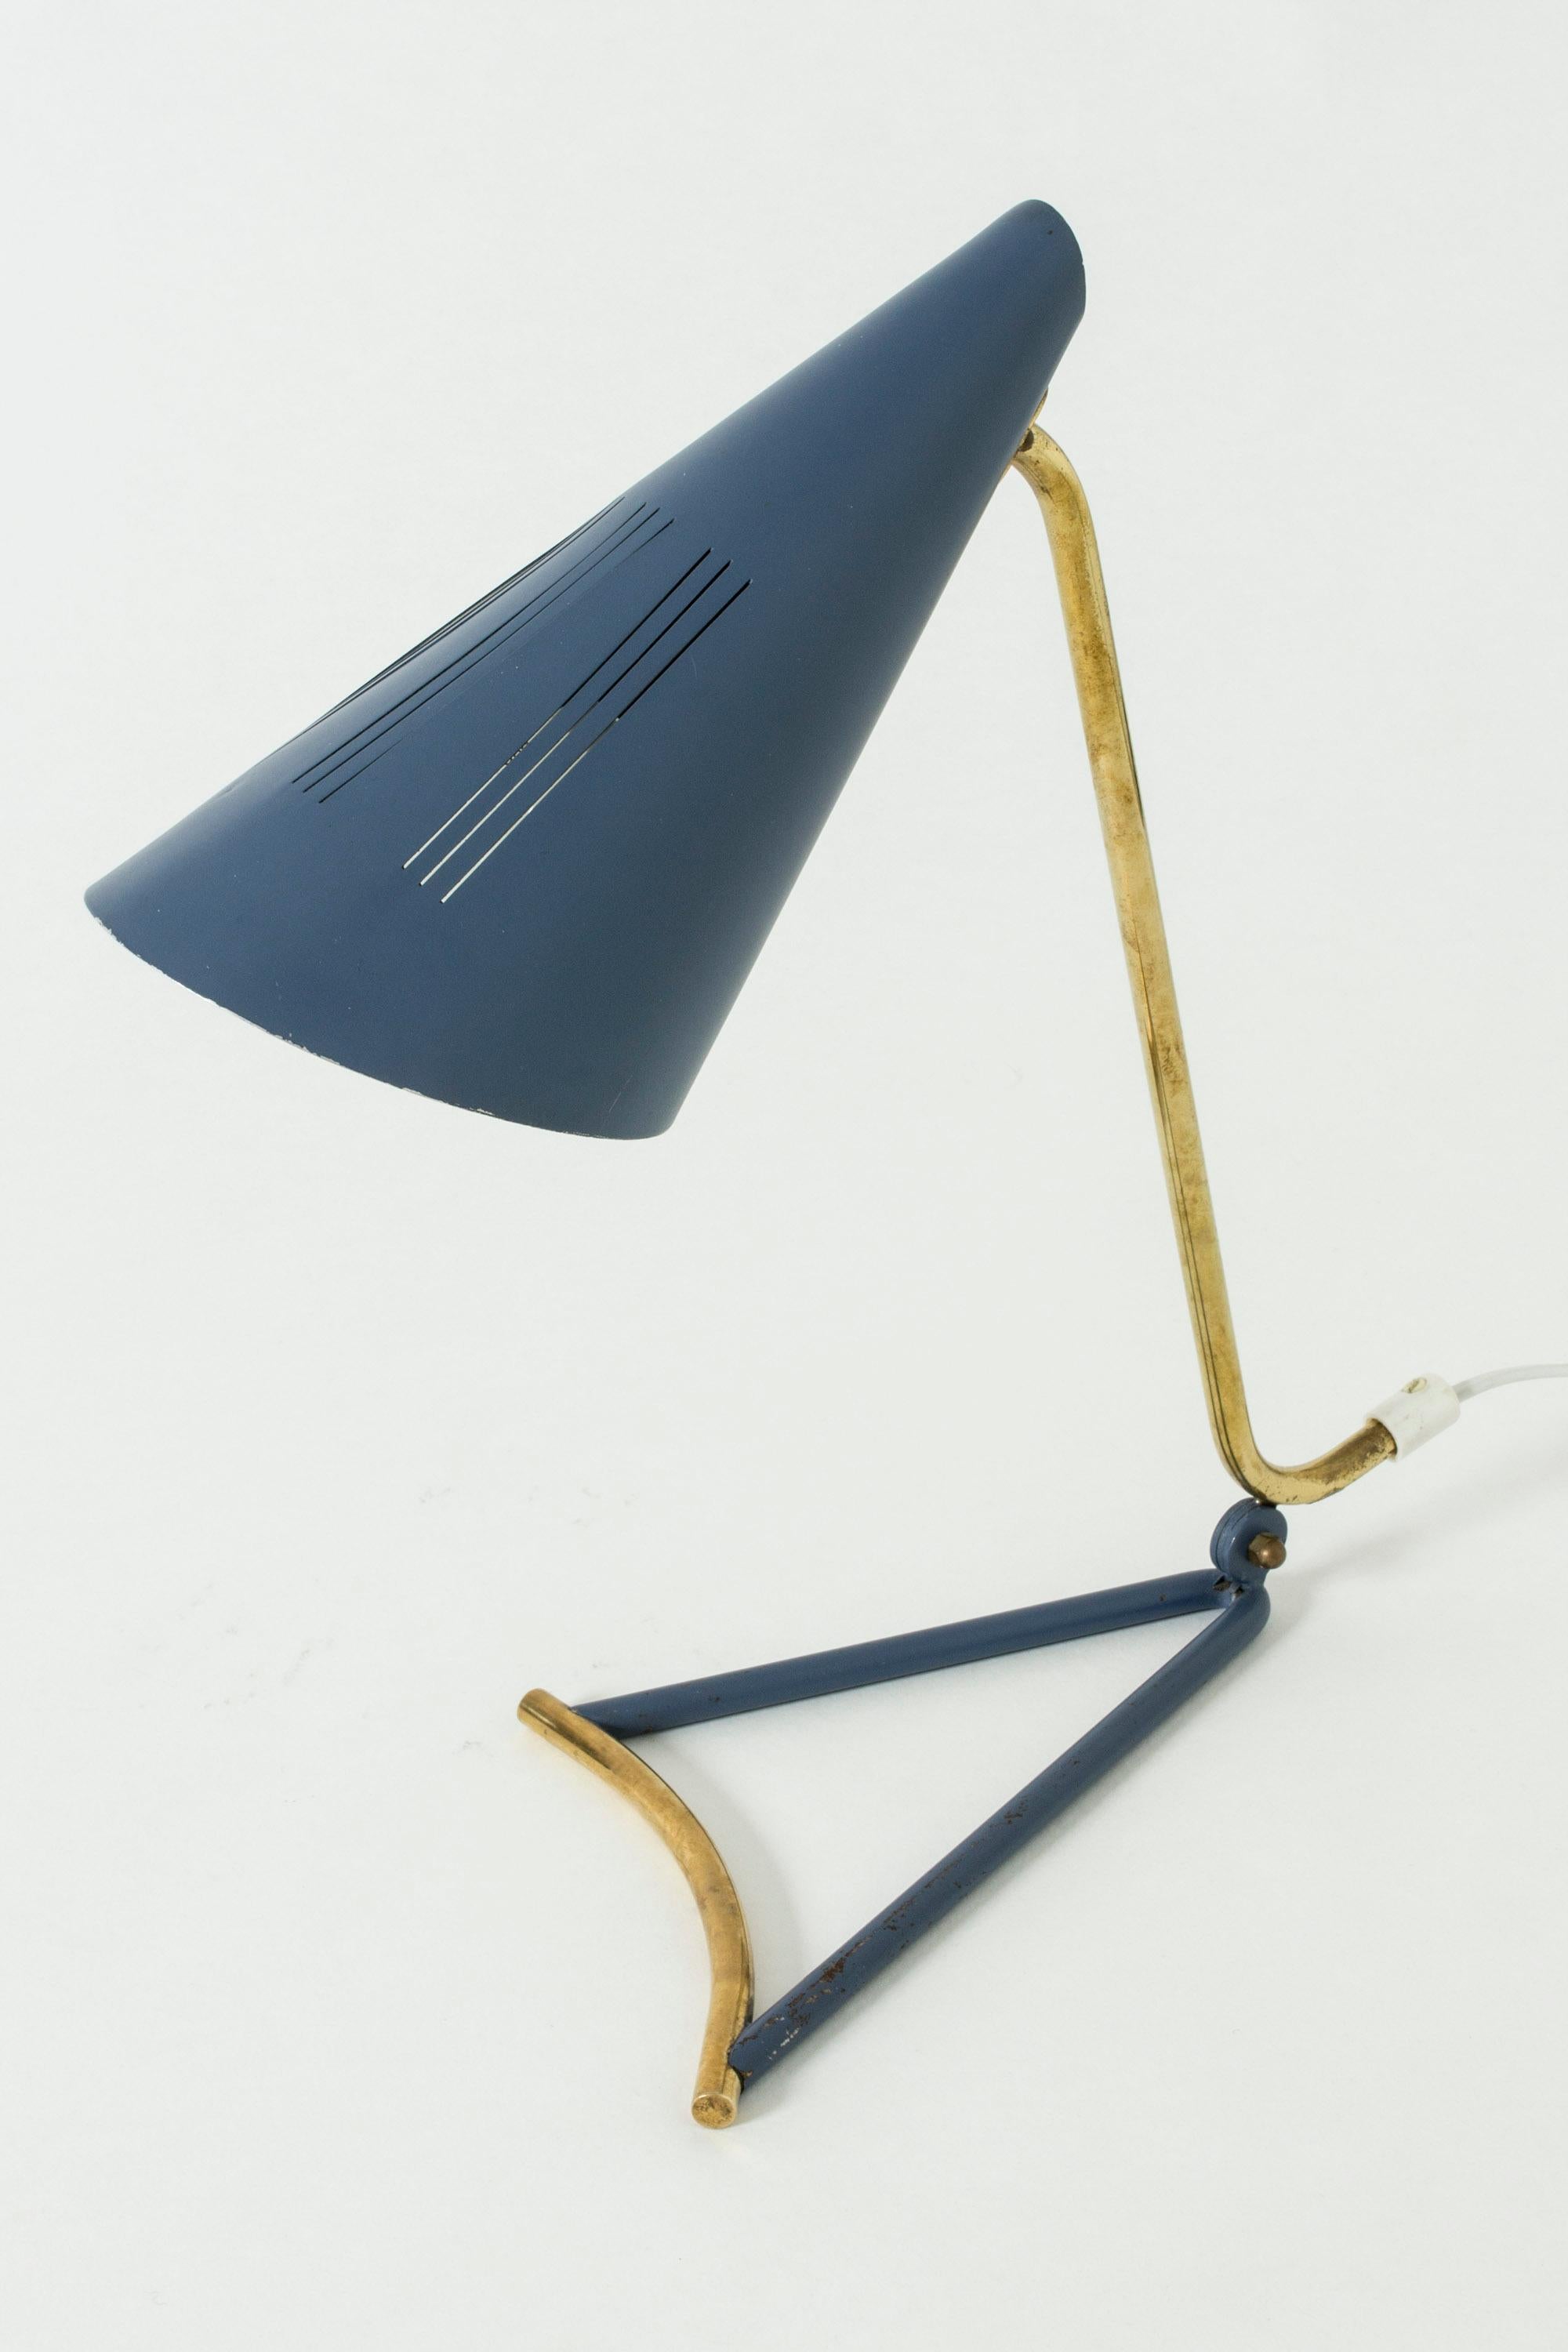 Mid-20th Century Lacquered Metal Table Lamp by Knud Joos for Lyfa, Denmark, 1950s